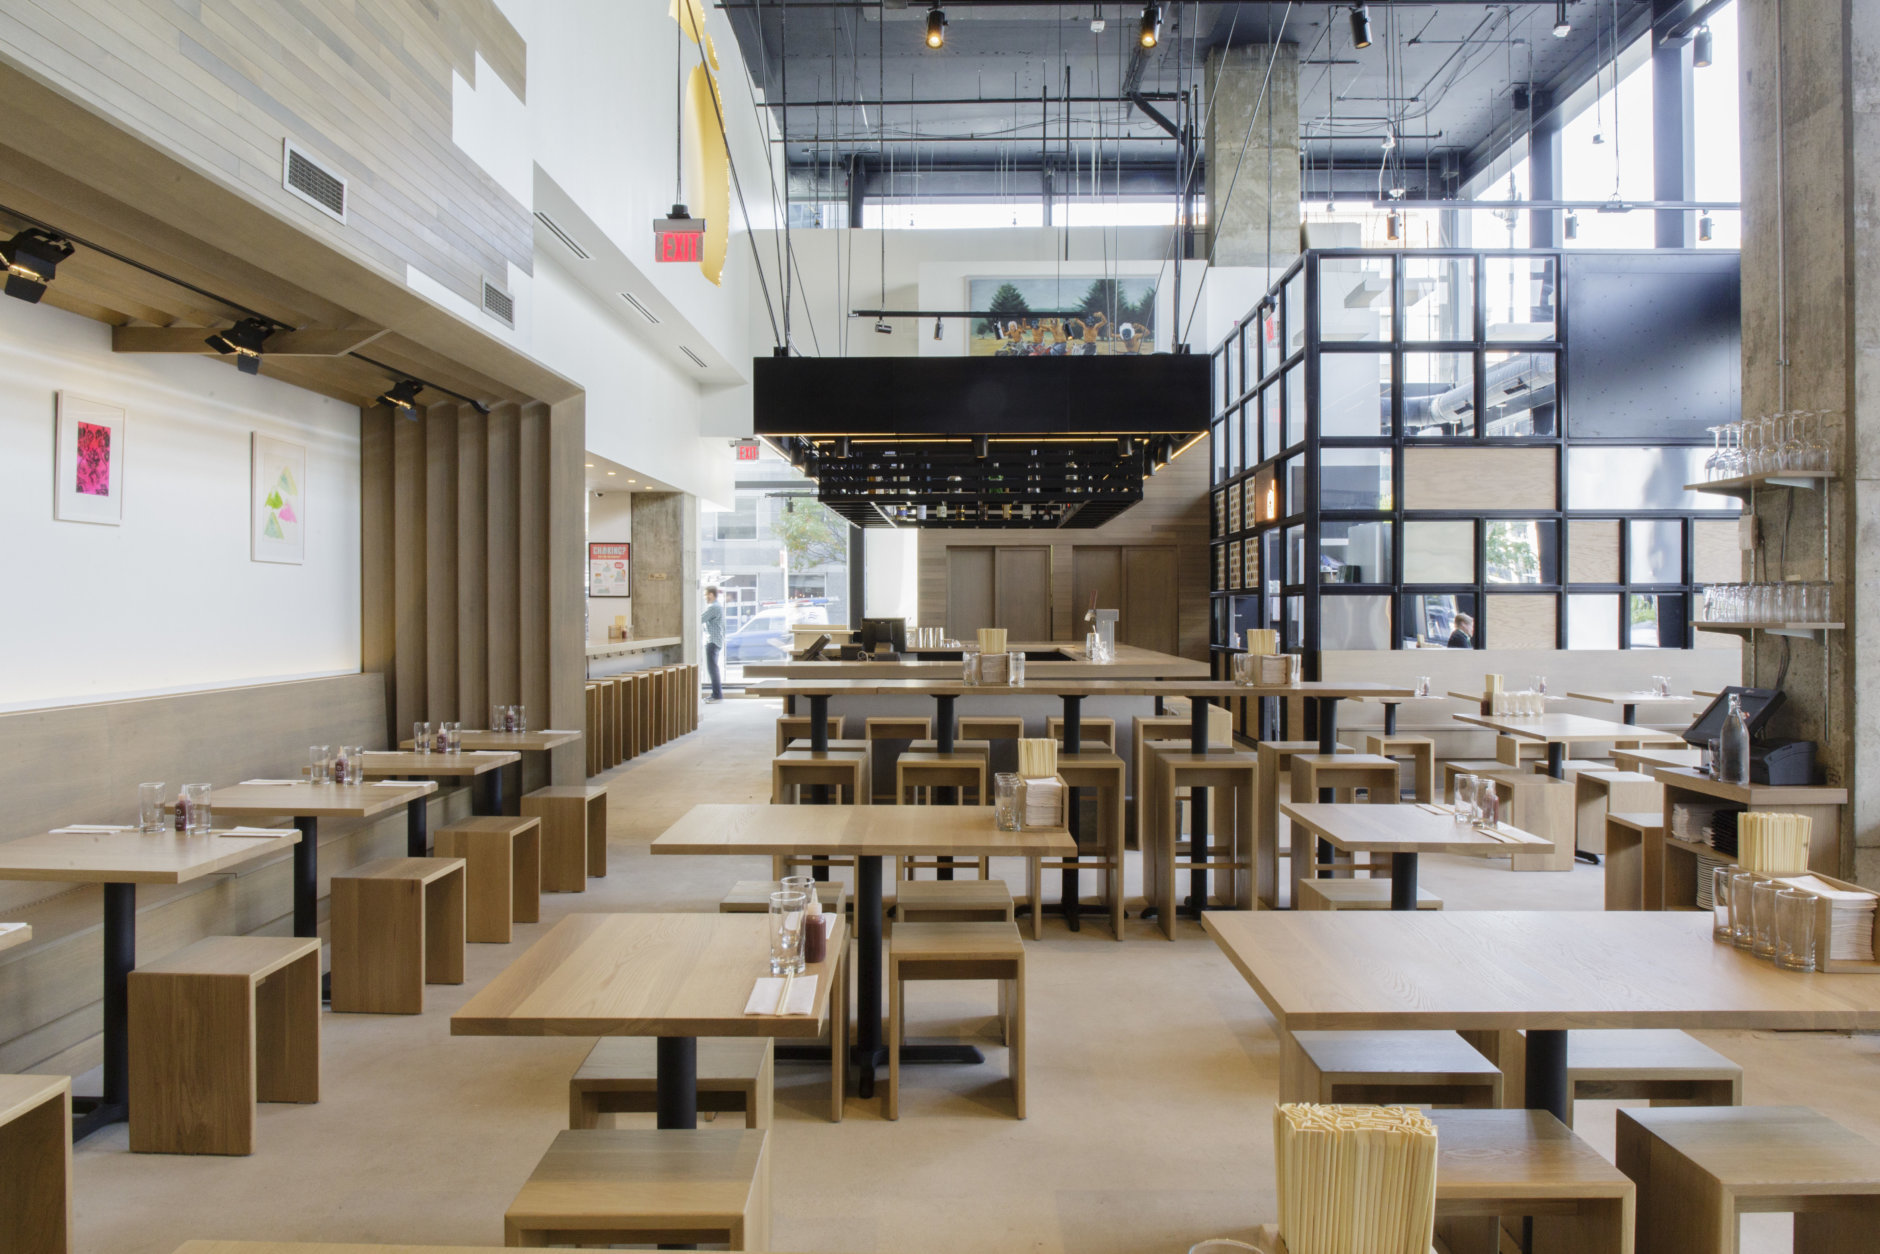 With Momofuku, simplicity and functionality were consistent themes in their design approach, //3877's David Tracz said. (Courtesy of //3877; photo by Gabriele Stabile)